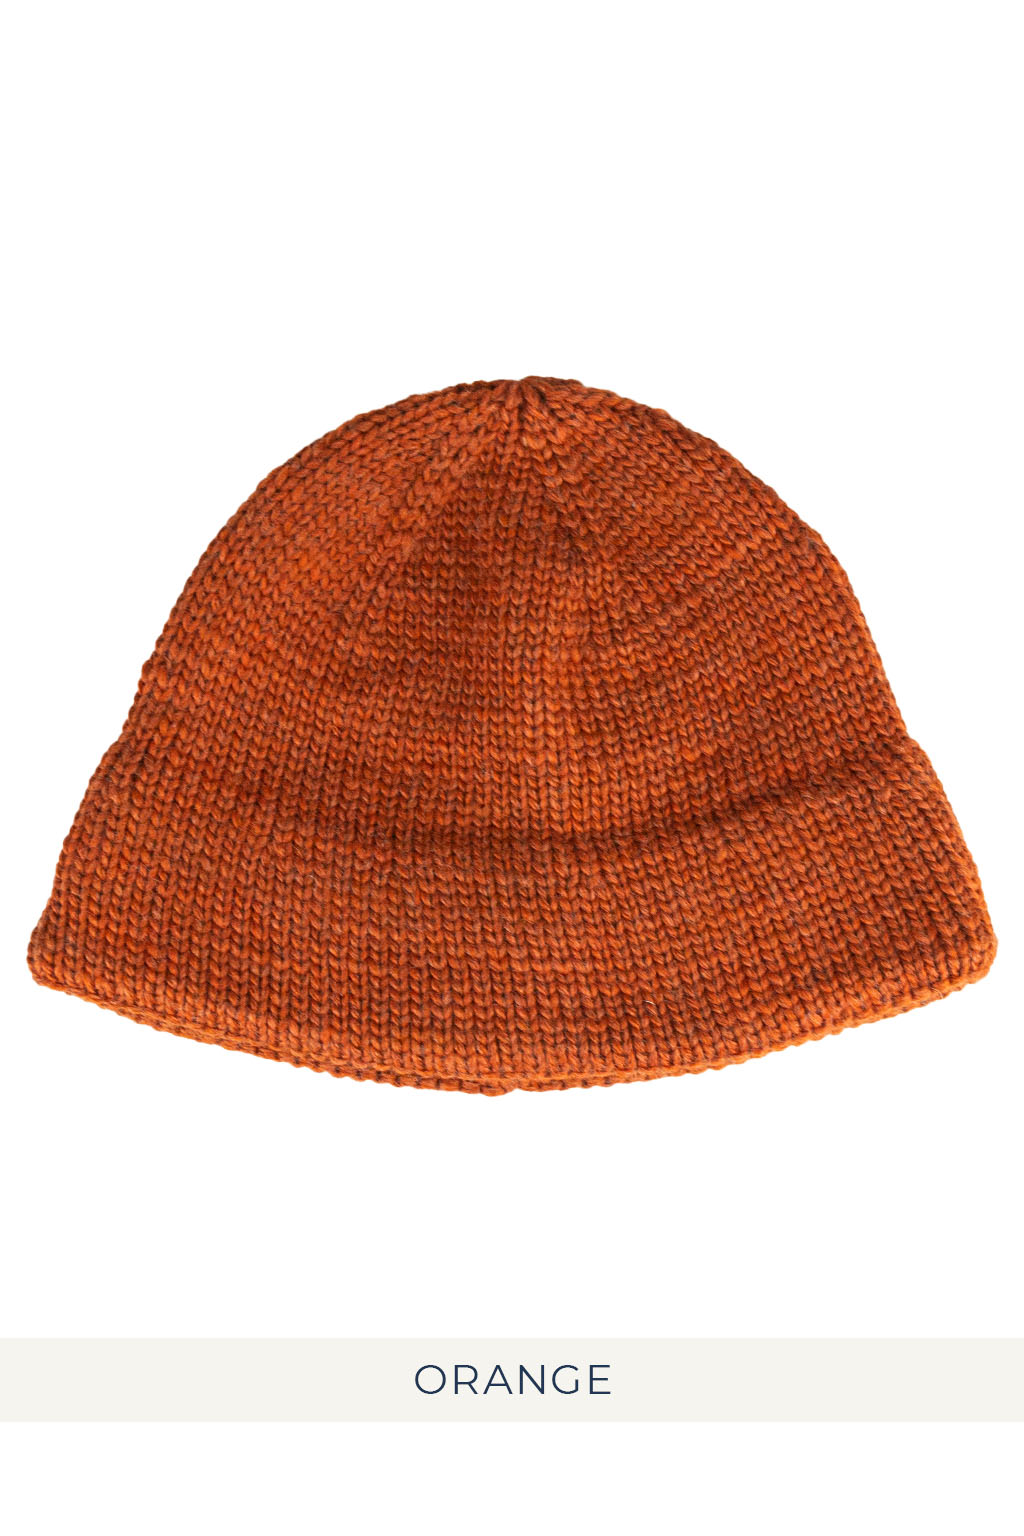 Cableami Wool Dixi w/ Cap - 3 color choices